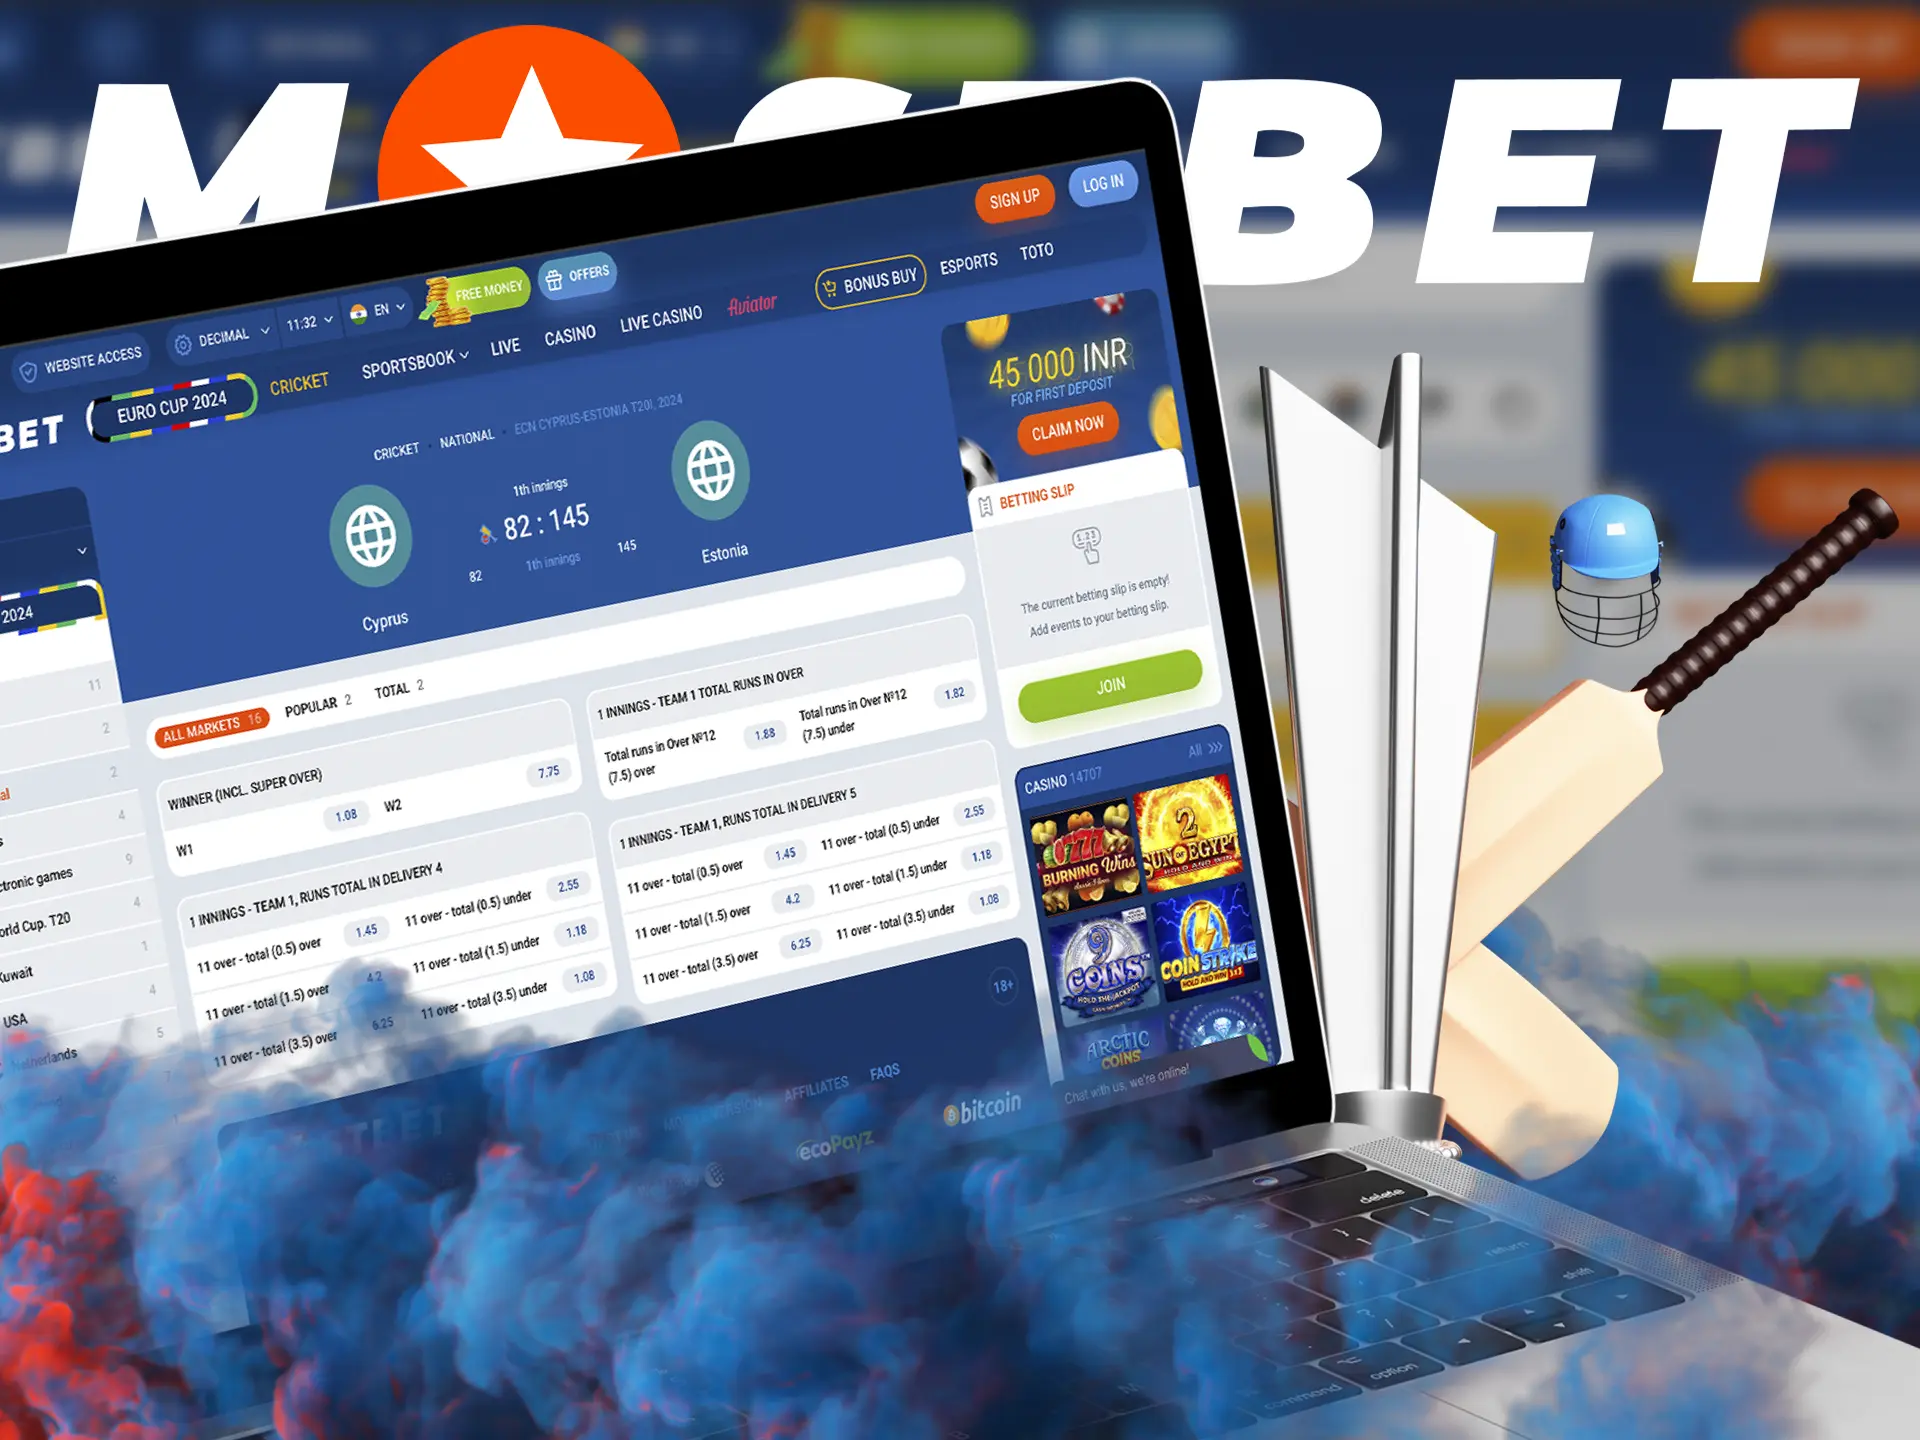 The variety of odds and betting options provides a great opportunity for bettors to win regularly at Mostbet.